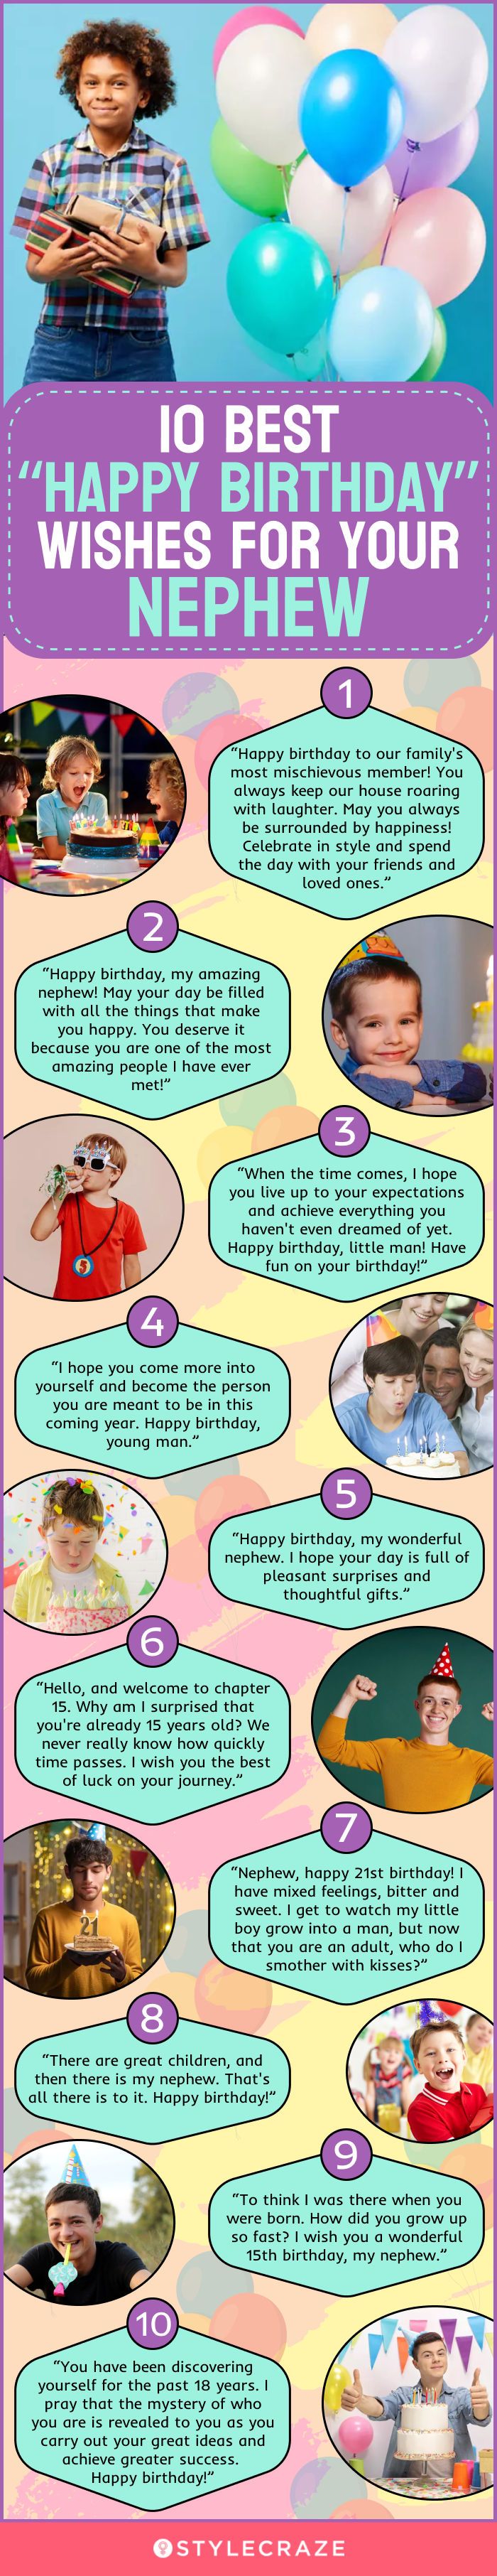 10 best “happy birthday” wishes for your nephew (infographic)